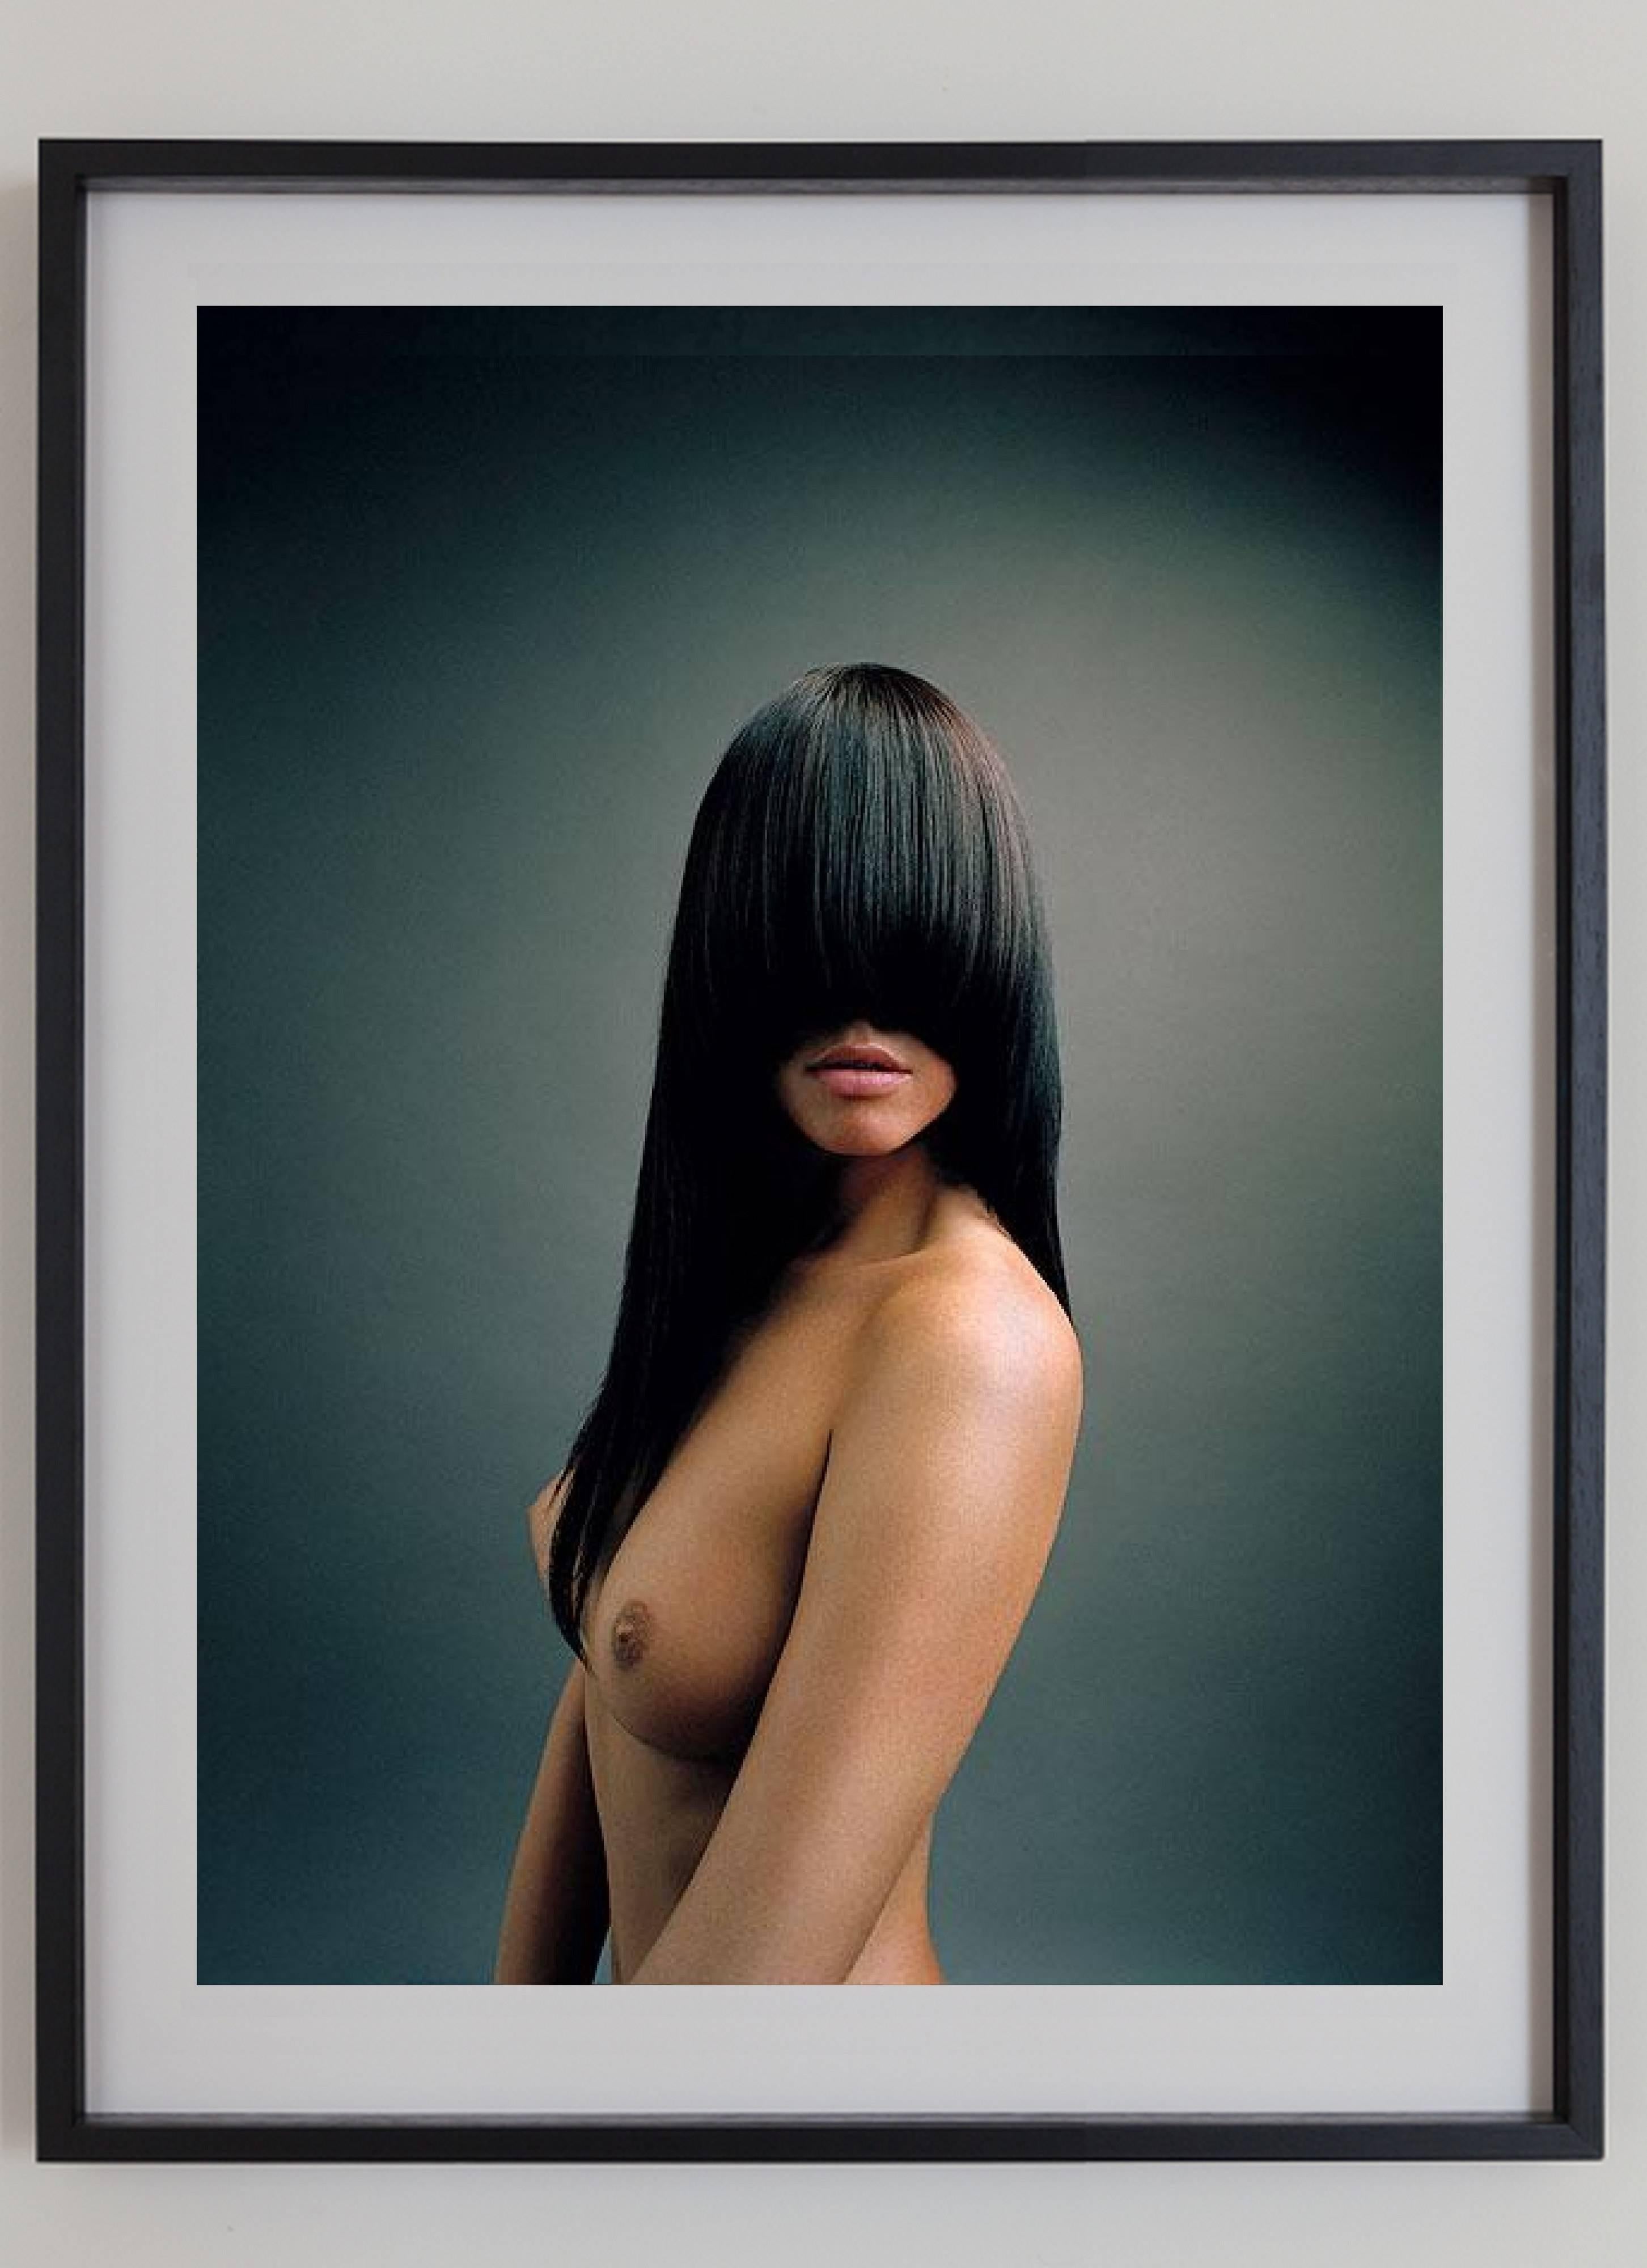 Irina, Vienna - nude portrait with long black hair, fine art photography, 2005 - Photograph by Andreas H. Bitesnich